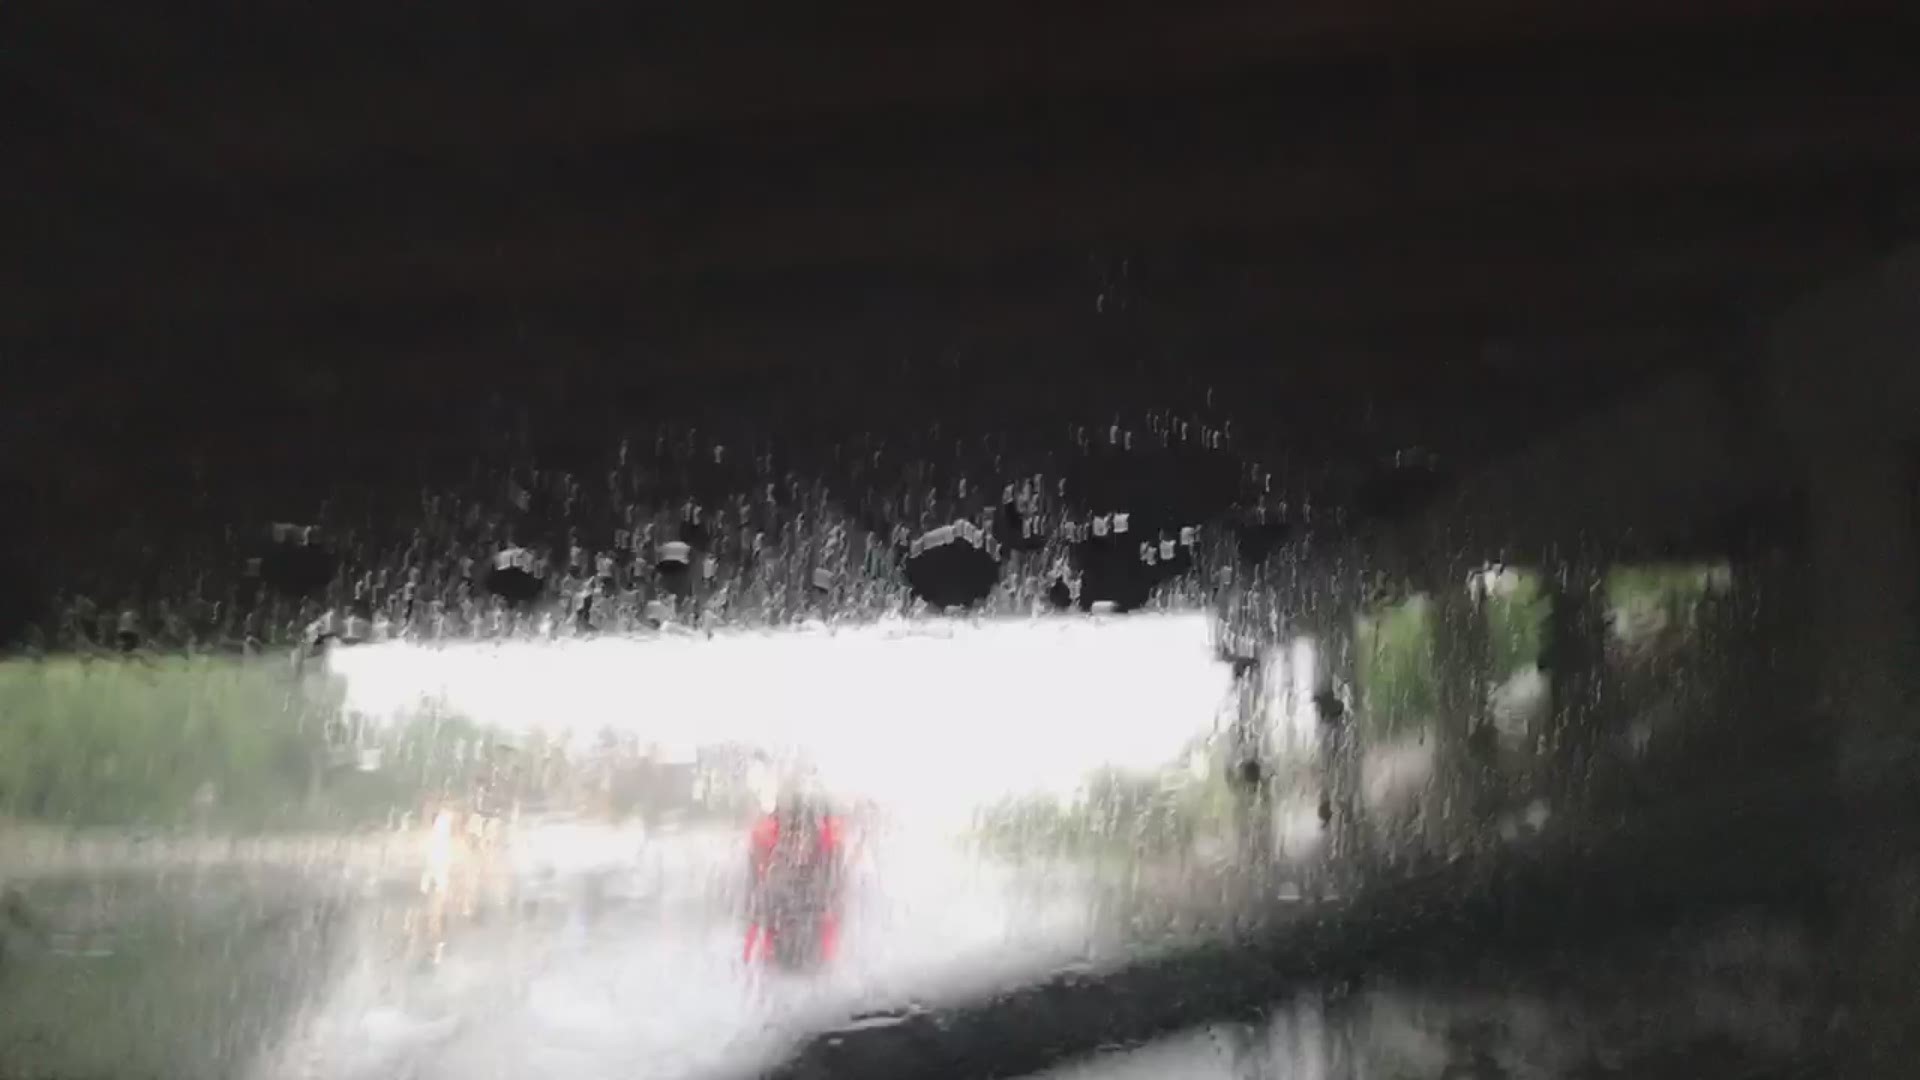 Video shows pouring rain in Pineville.